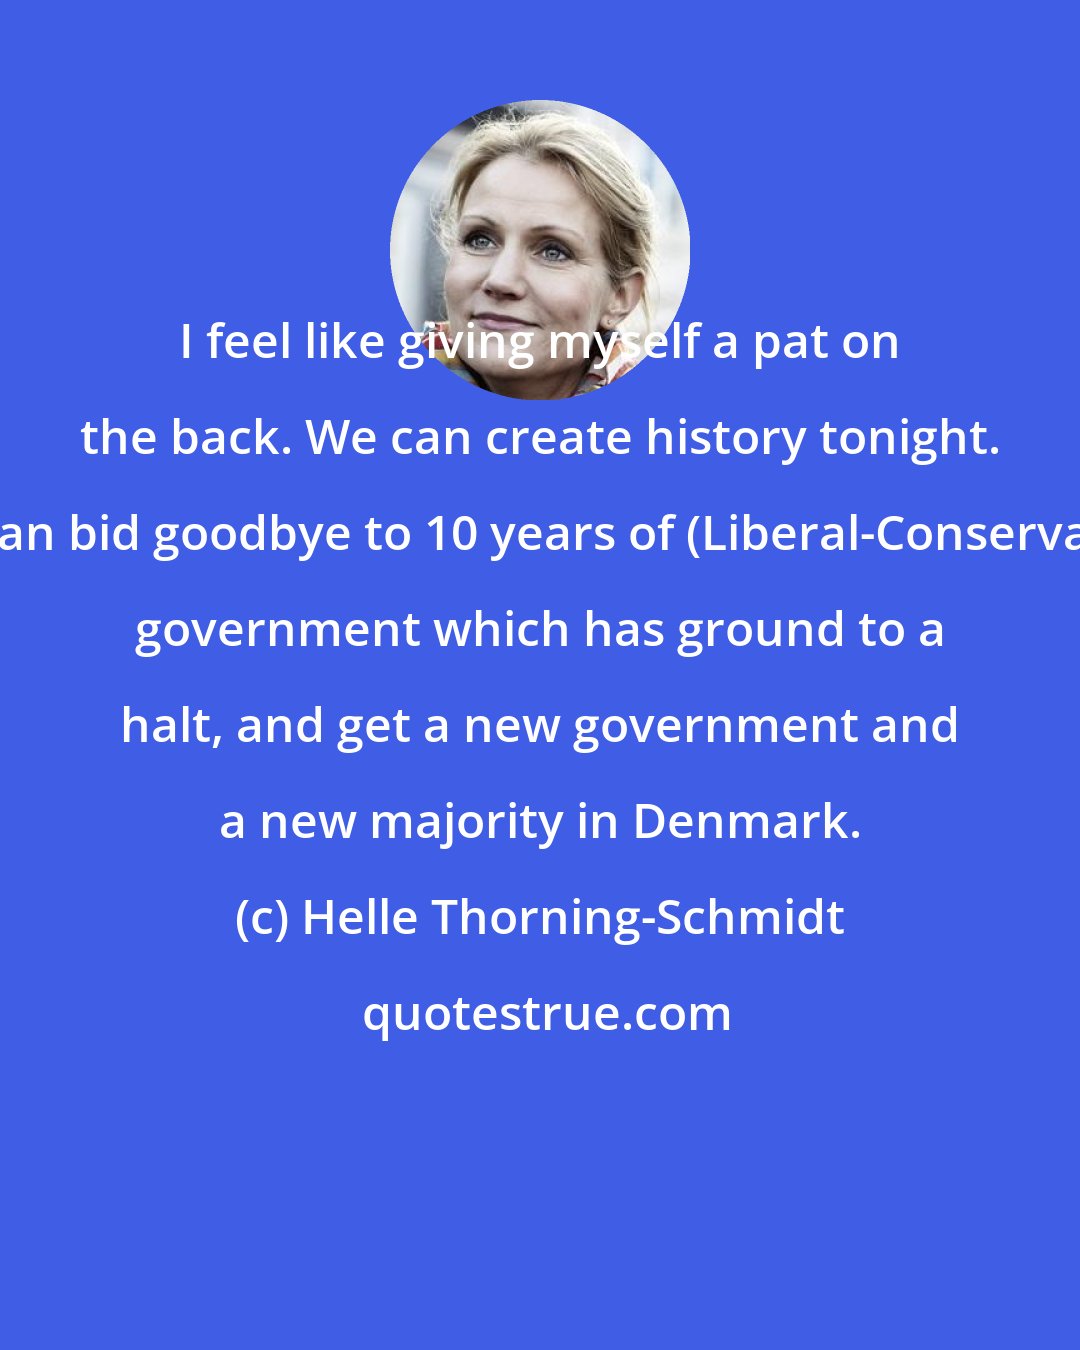 Helle Thorning-Schmidt: I feel like giving myself a pat on the back. We can create history tonight. We can bid goodbye to 10 years of (Liberal-Conservative) government which has ground to a halt, and get a new government and a new majority in Denmark.